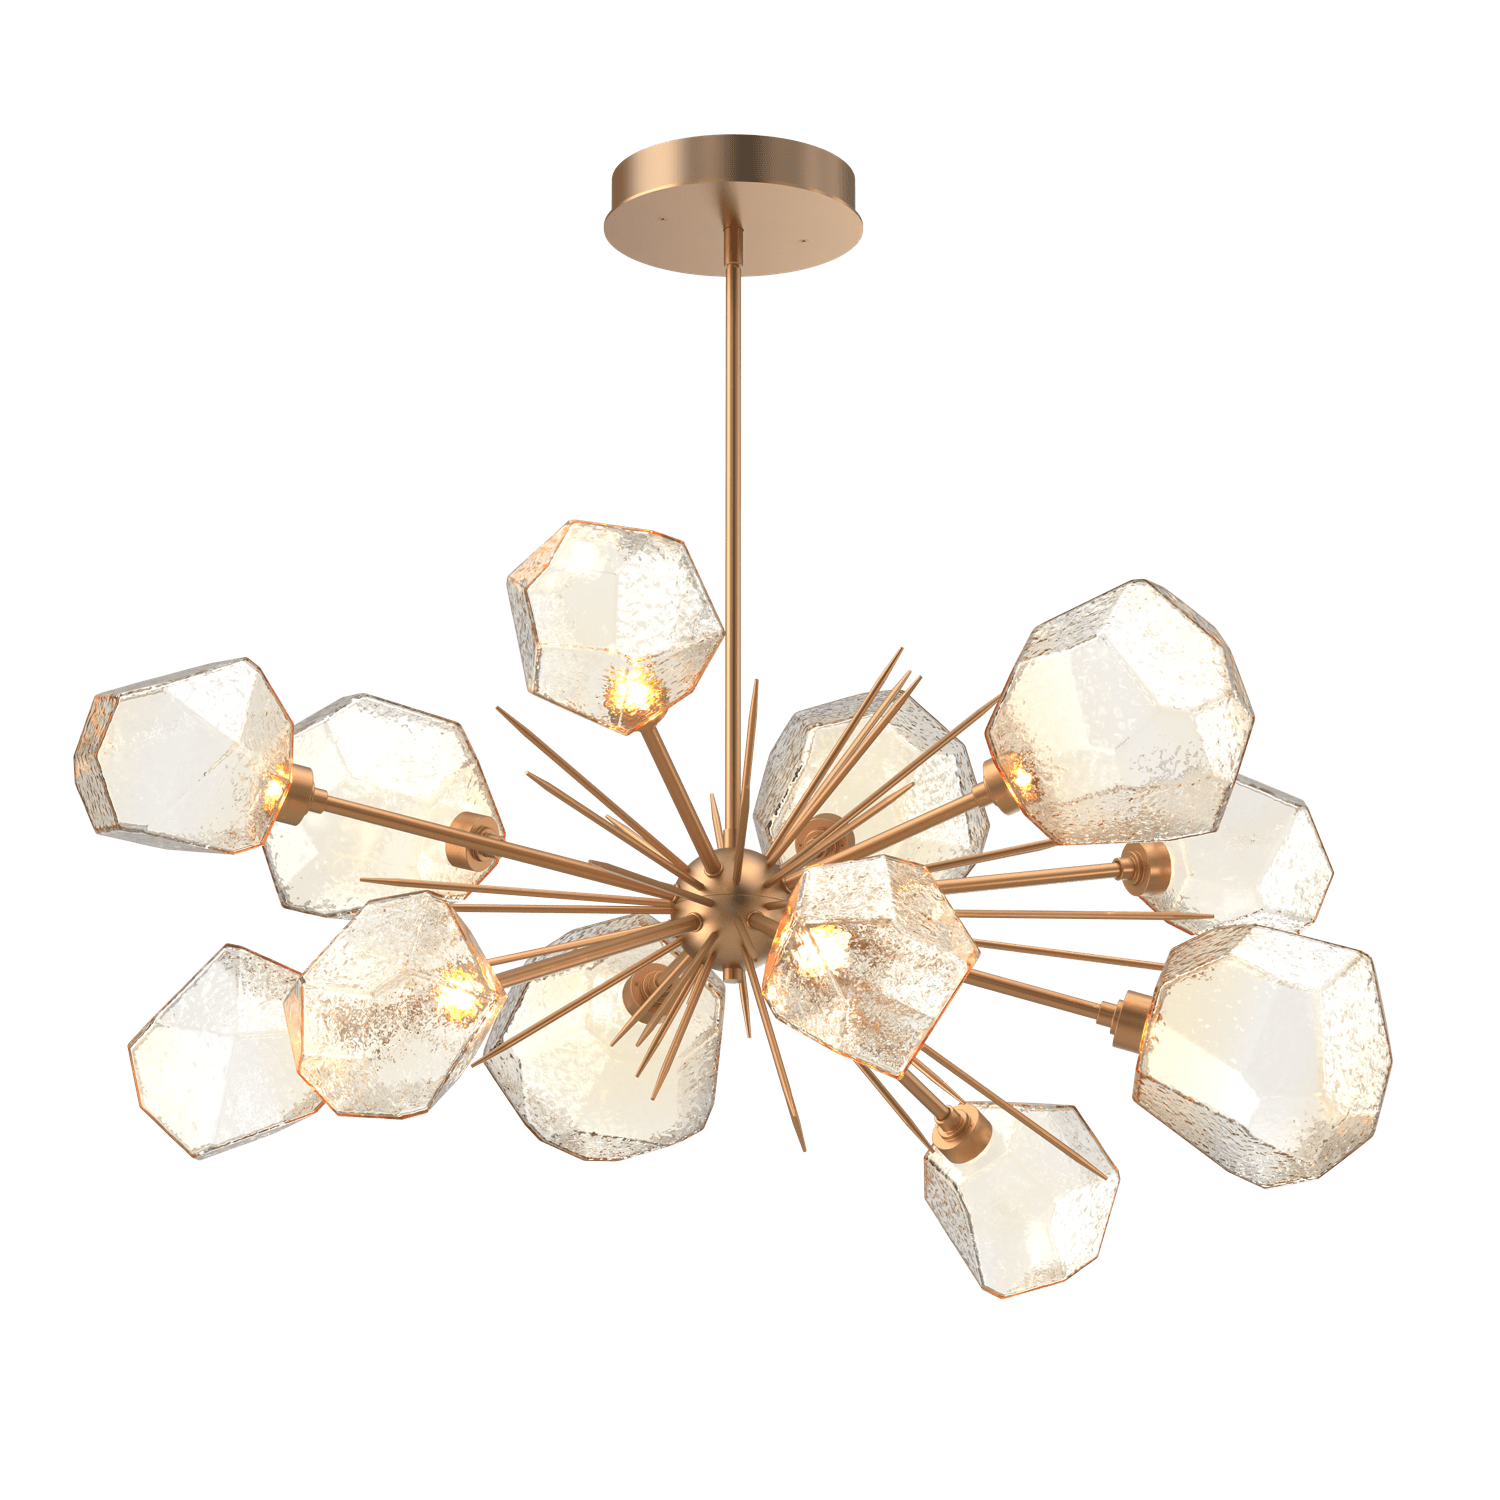 PLB0039-0D-NB-A-Hammerton-Studio-Gem-43-inch-oval-starburst-chandelier-with-novel-brass-finish-and-amber-blown-glass-shades-and-LED-lamping